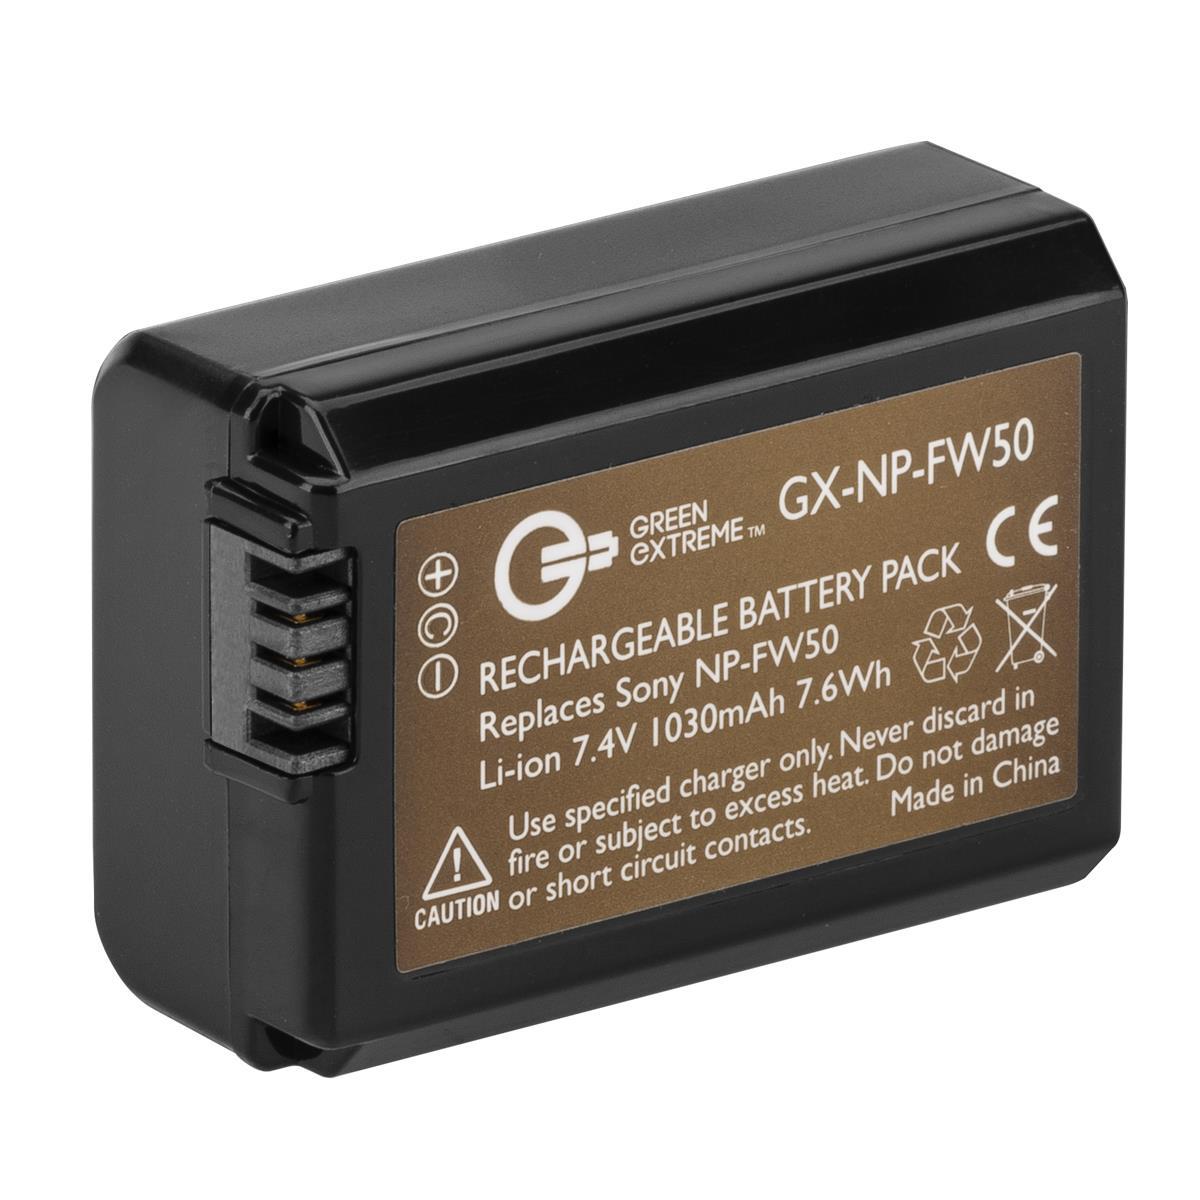 Image of Green Extreme NP-FW50 Lithium-Ion Battery Pack (7.4V